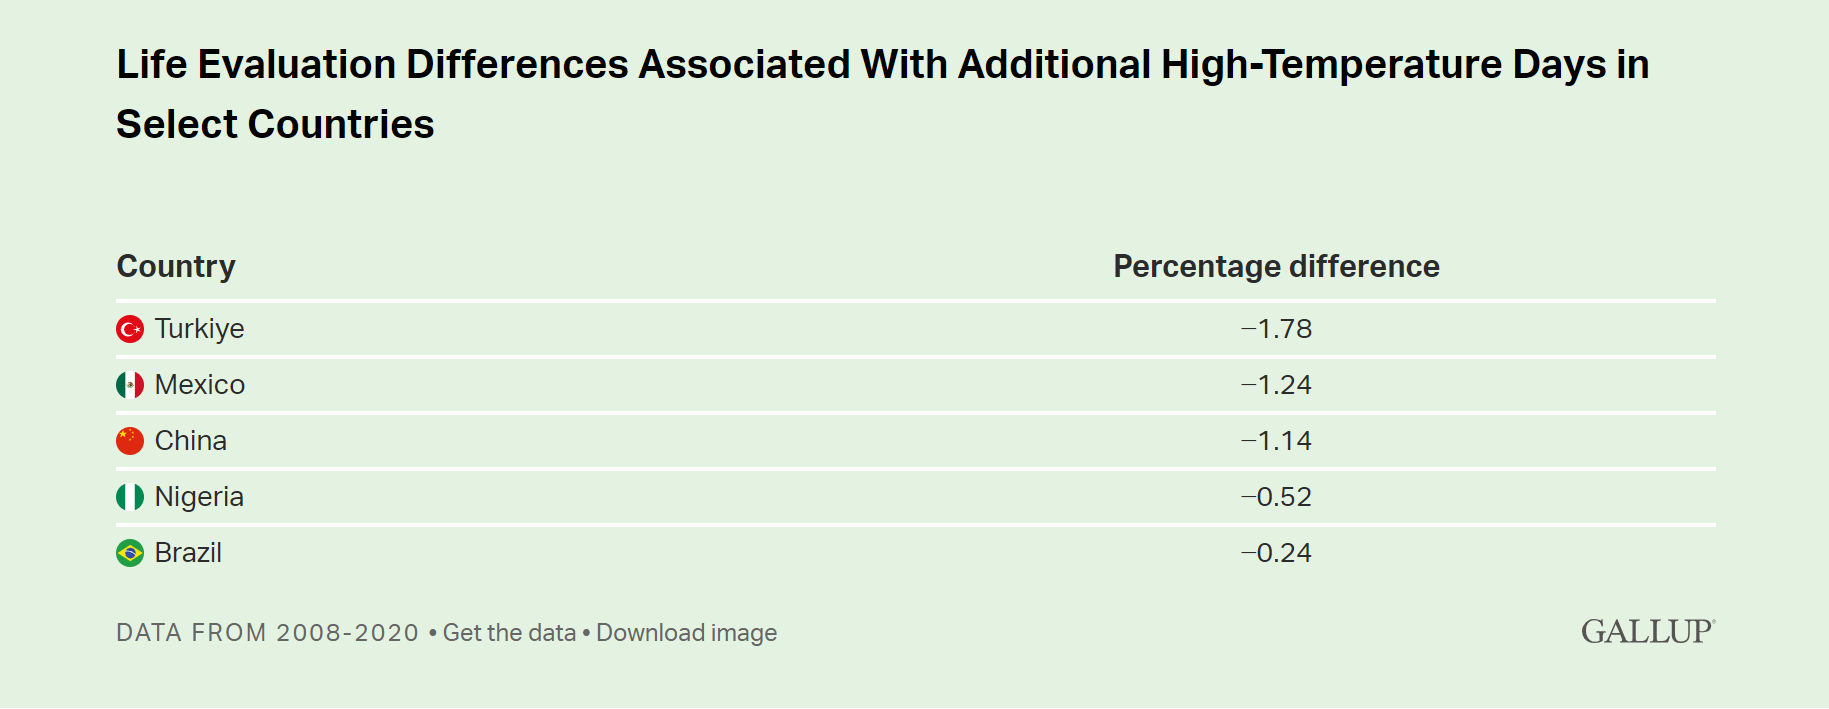 Life evaluation differences associated with additional high-temperature days in select countries. Graphic: Gallup